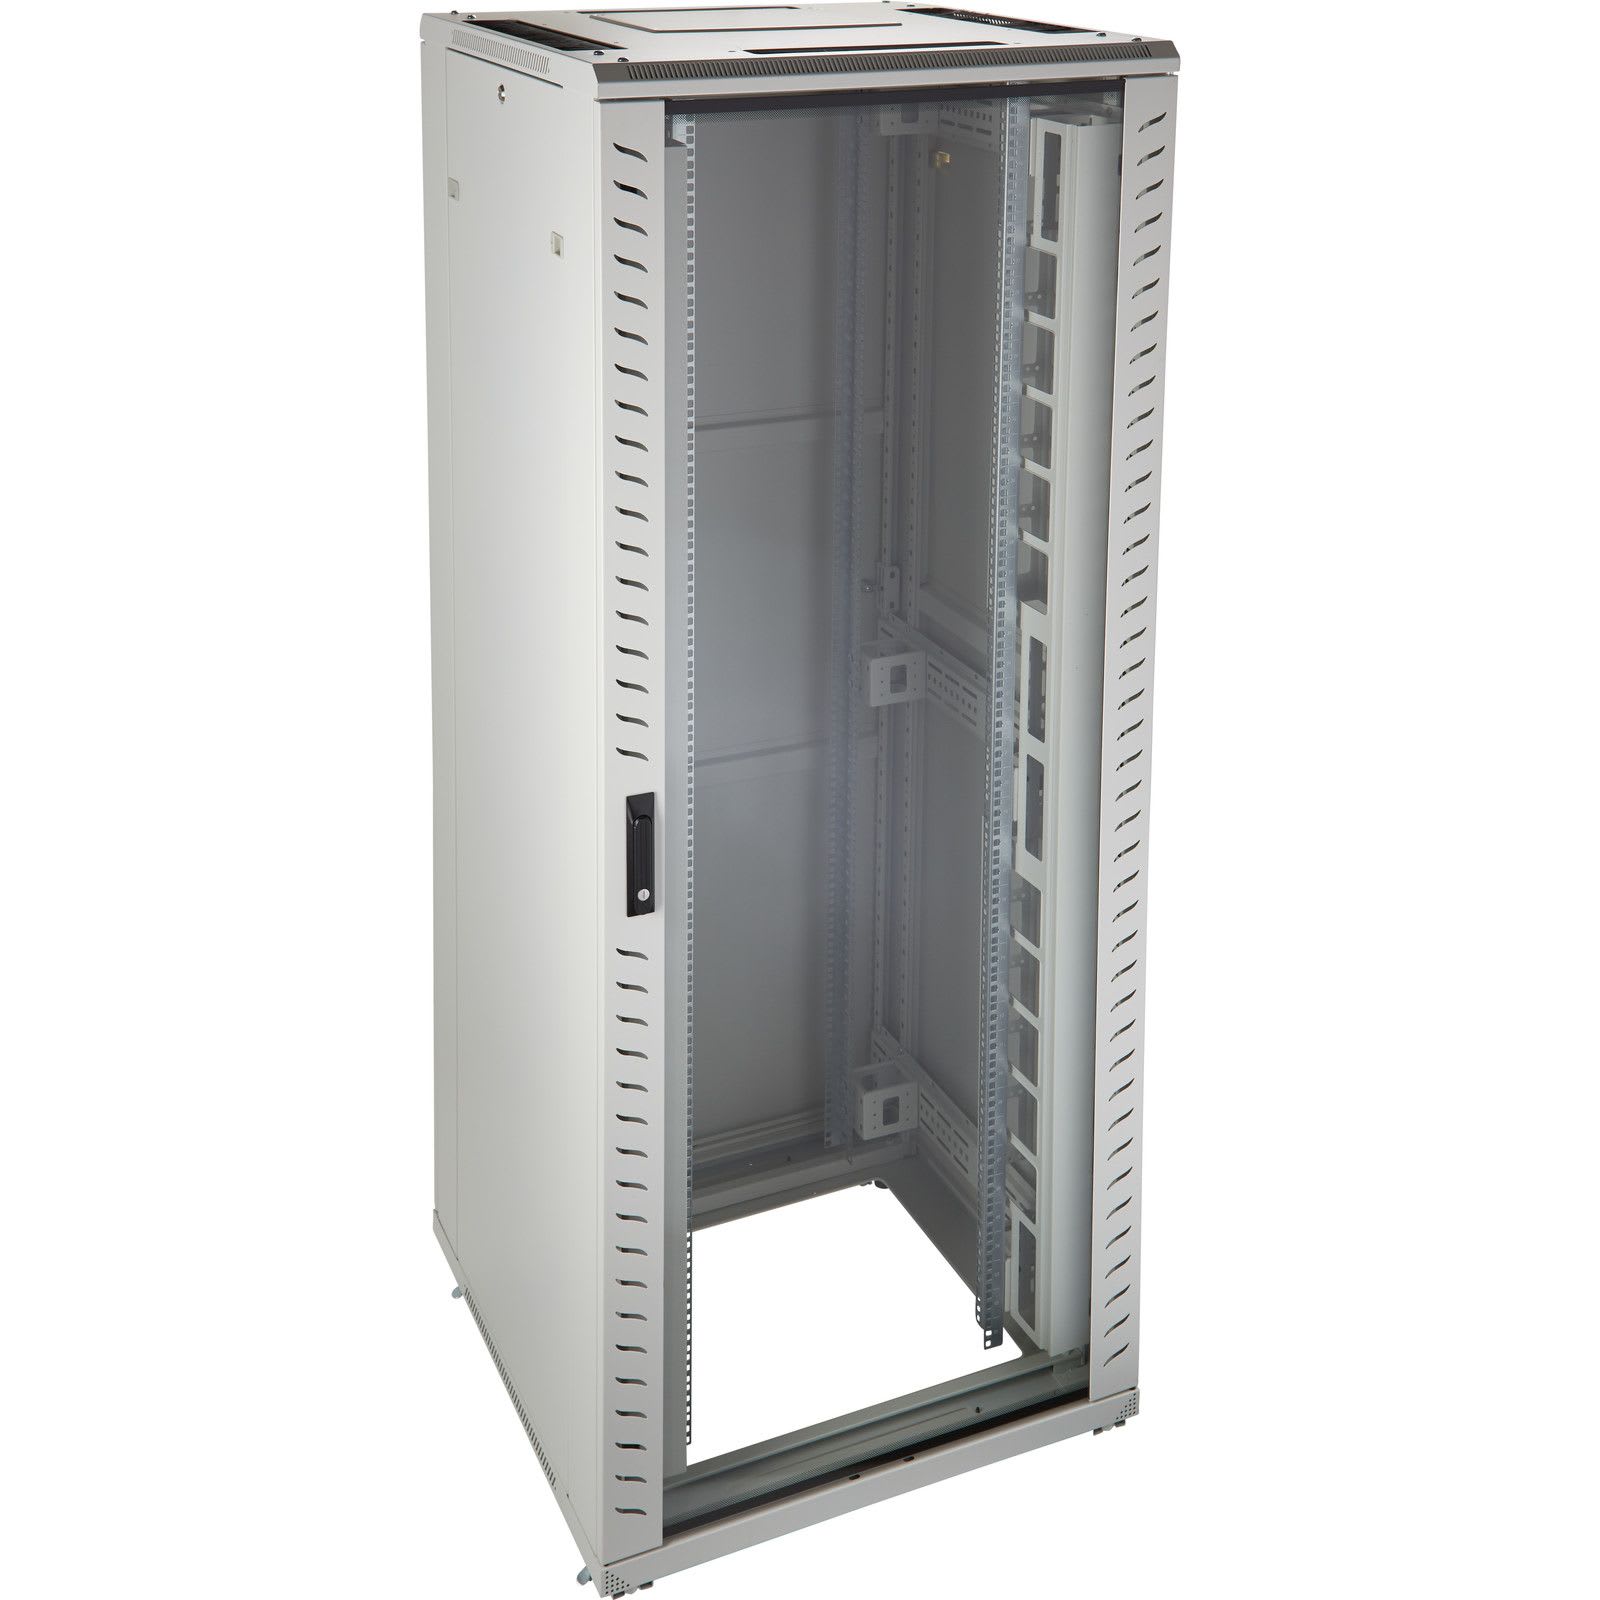 Excel Networking Solutions - Environ CR800 33U Rack 800x800mm Glass (F) Steel (R) B/Panels F/Mgmt Grey White